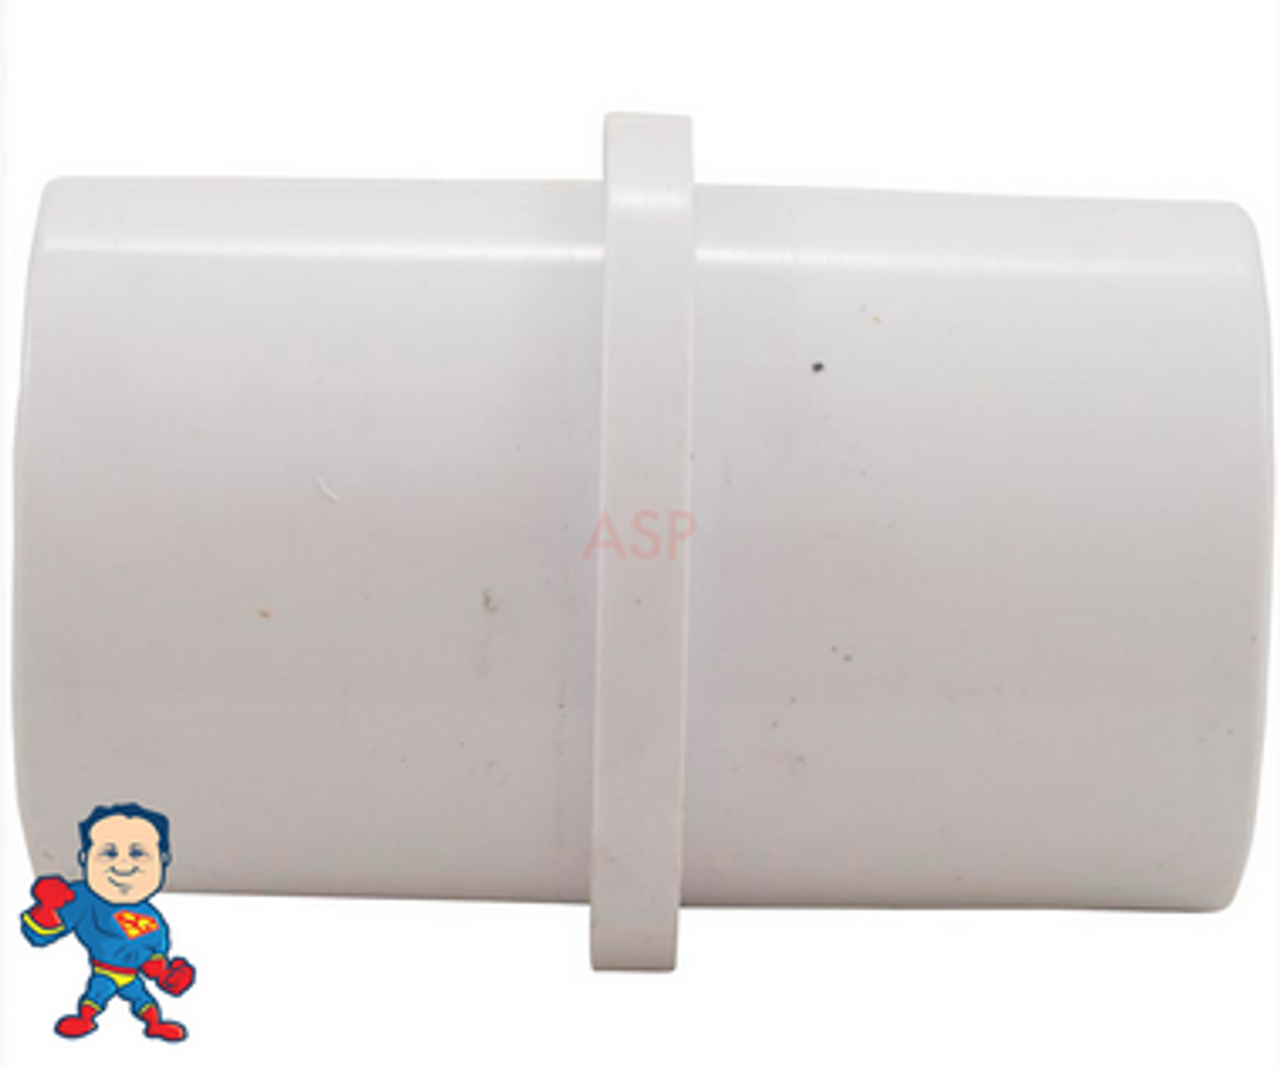 This part can be used to glue 2 pieces of 1 1/2" ID PVC Pipe back together. It measures 1 1/2" OD on both sides and will glue inside of standard size 1 1/2" PVC pipe that will measure about 1 1/2" ID and 1 7/8" OD